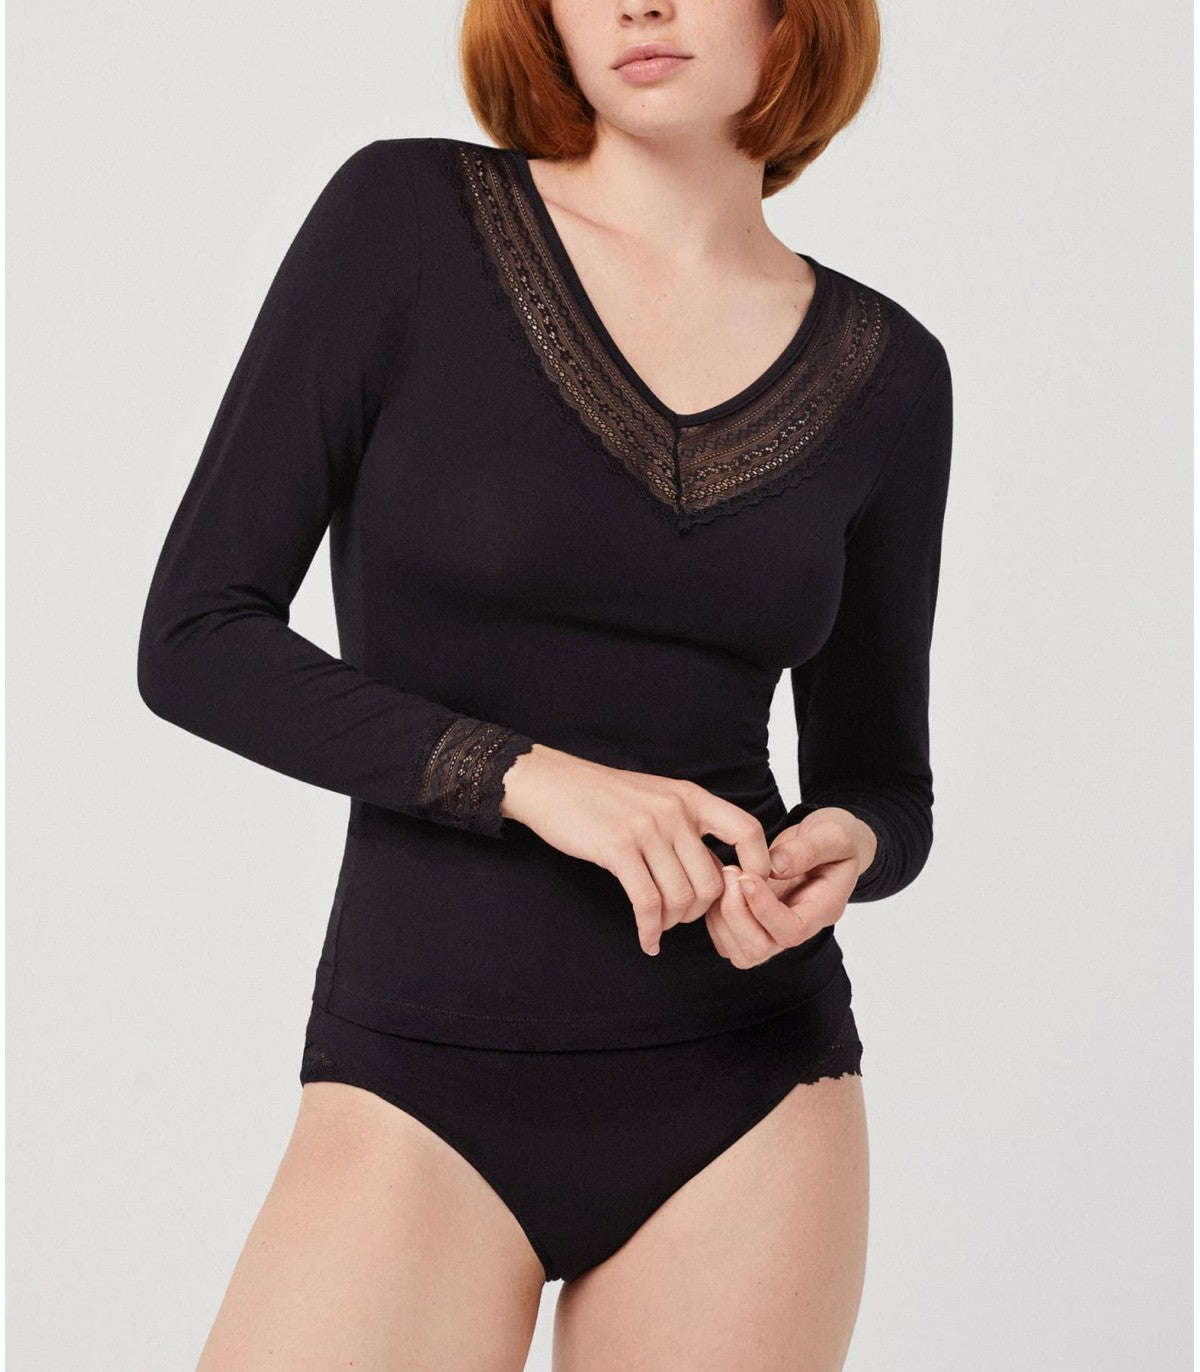 Ysabel Mora 19250 Lace Trim Top - Soft and warm long sleeved black vest top with a lace trim v-neck and lace trim cuffs.